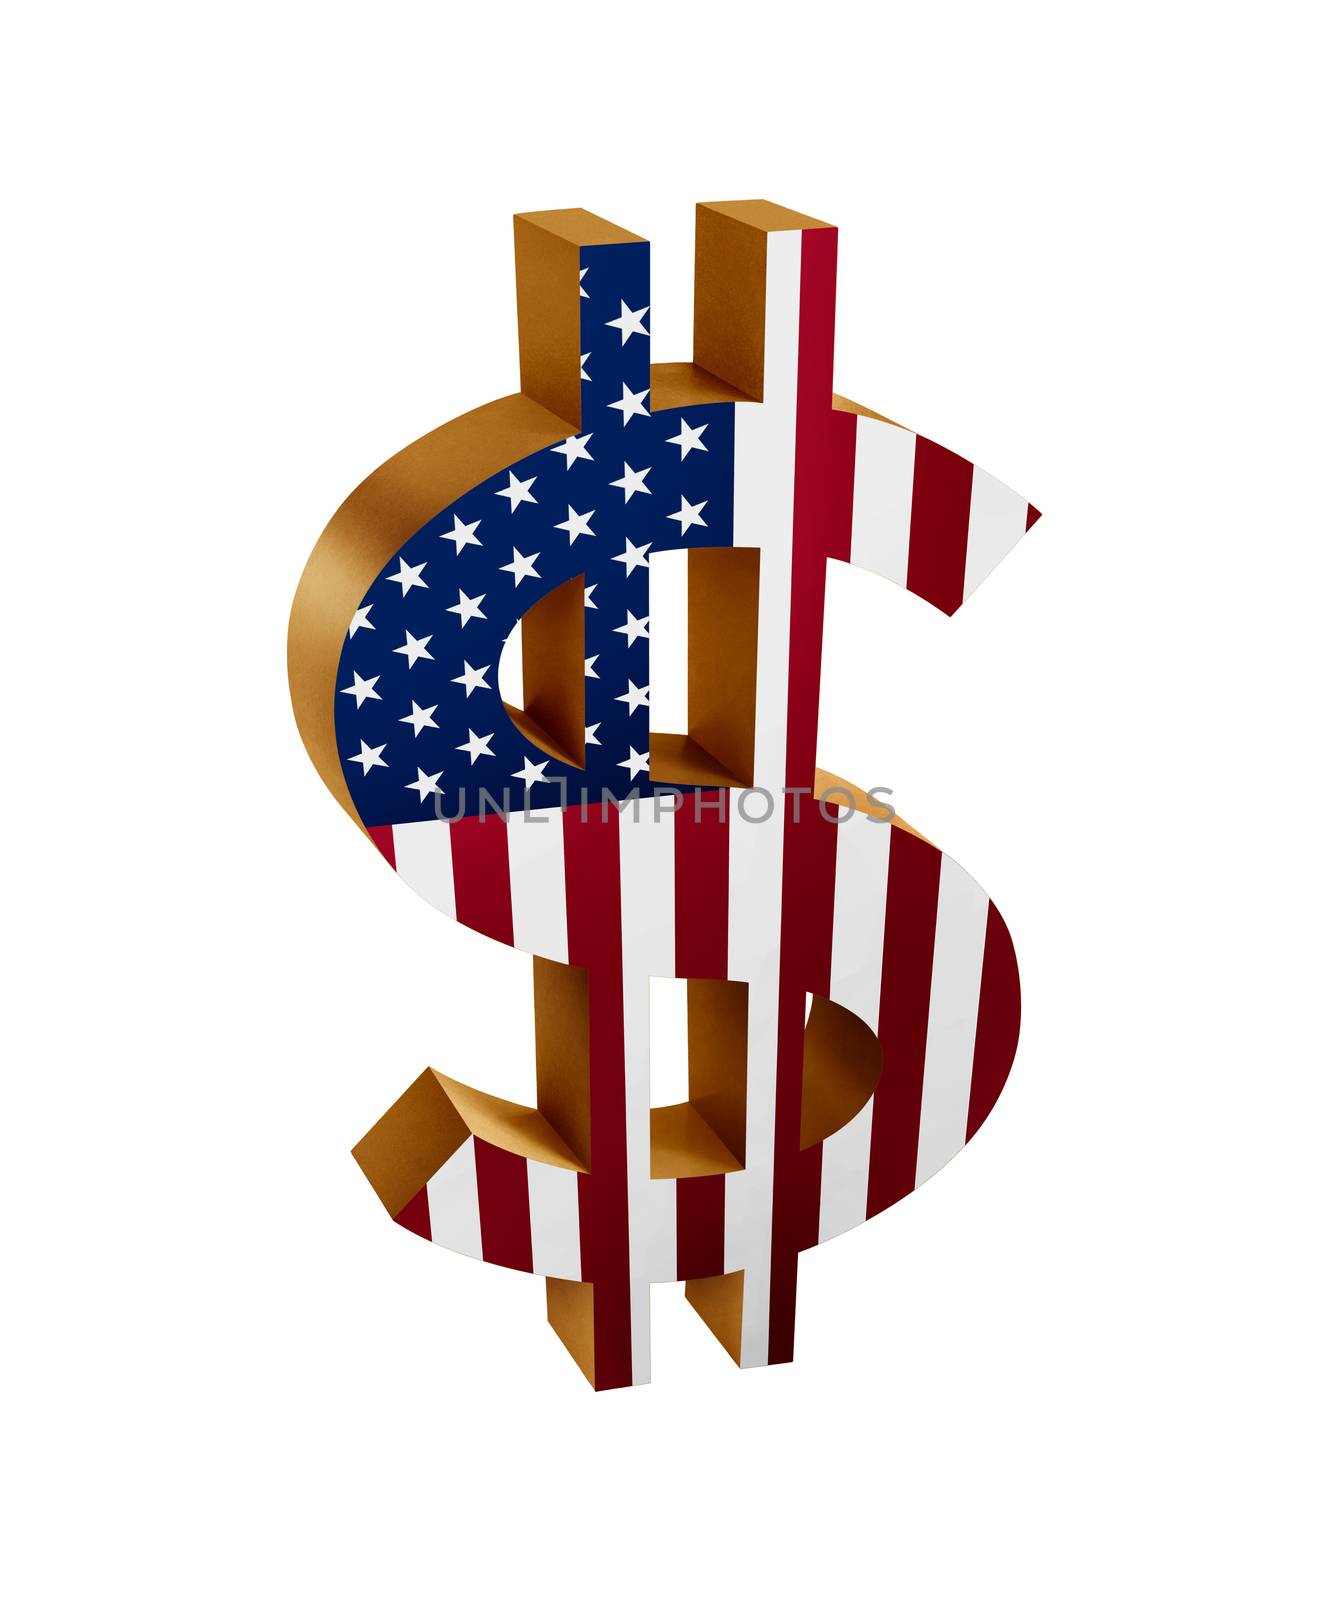 US Dollar Sign with the US Flag by igorot